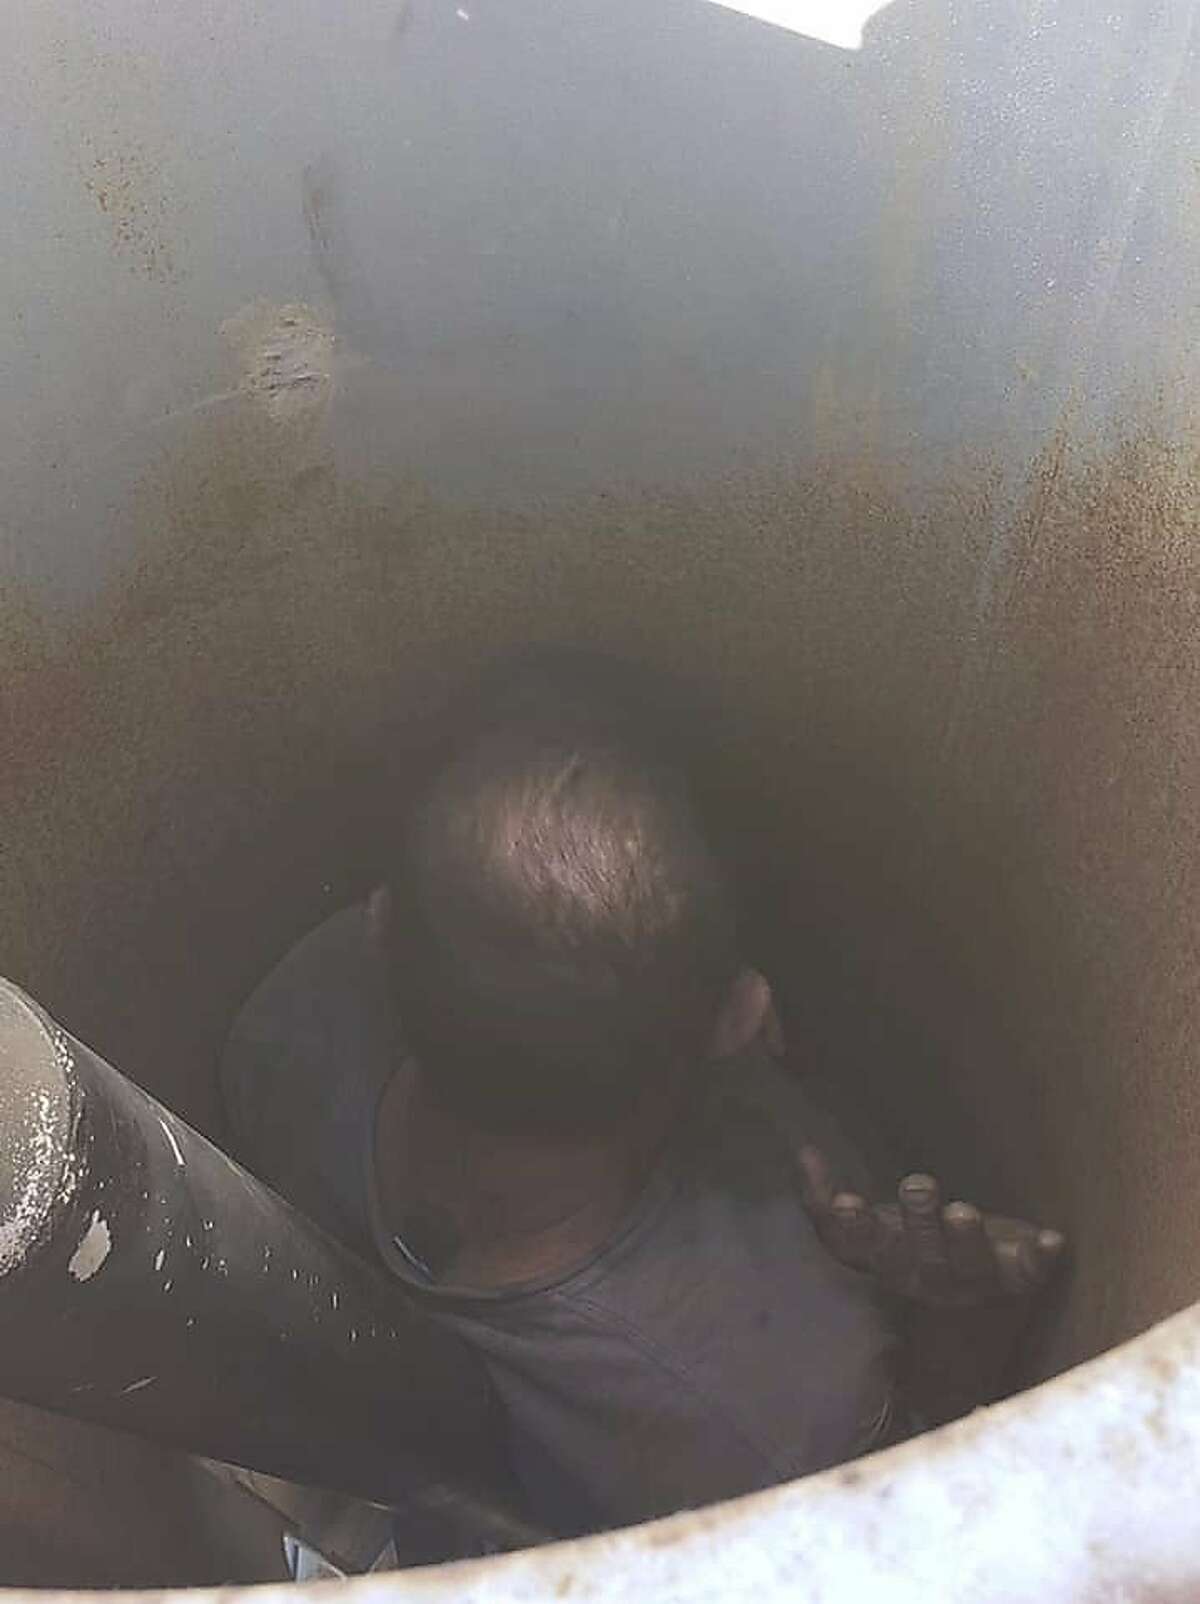 This photo provided by the Sonoma County Sheriff's Office shows a man who was found Tuesday, June 8, 2021 at a vineyard in Santa Rosa by a sheriff's deputy responding to a call about a suspicious vehicle parked in the area. Officials in Northern California rescued the man who said he had been trapped inside a large fan at a vineyard for two days. (Sonoma County Sheriff's Office via AP)